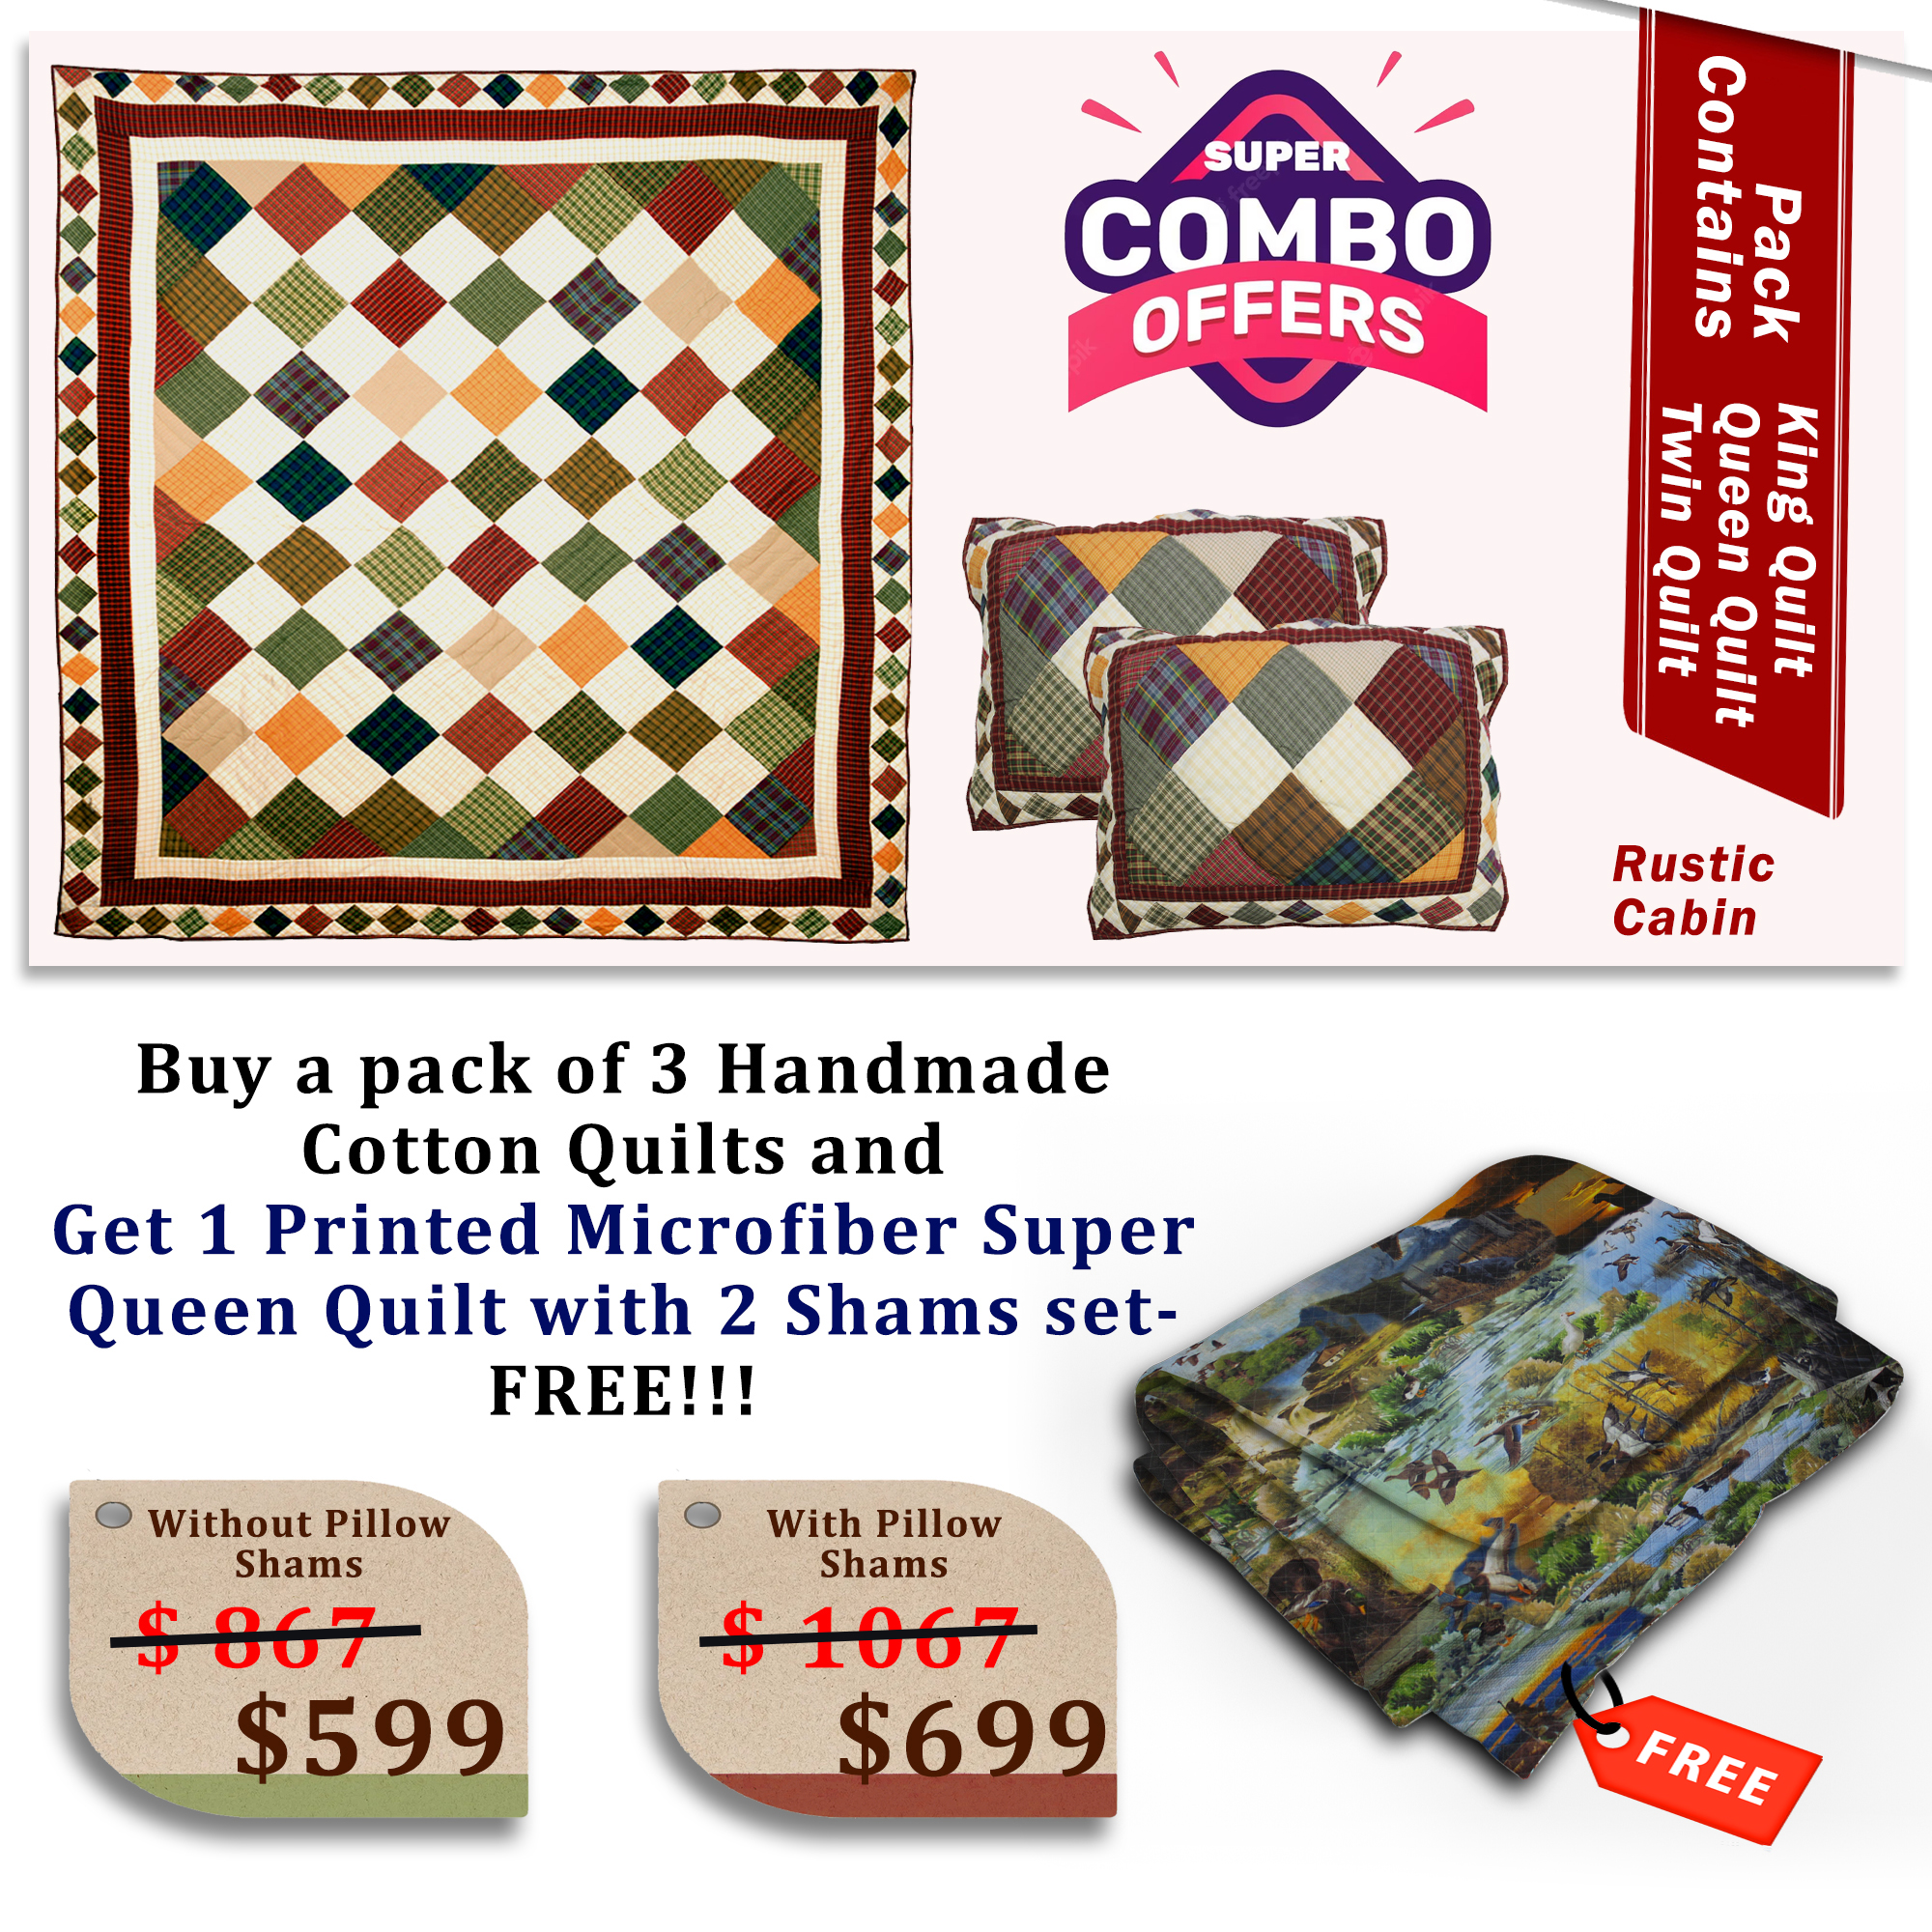 Rustic Cabin - Handmade Cotton quilts| Buy 3 cotton quilts and get 1 Printed Microfiber Super Queen Quilt with 2 Shams set FREE